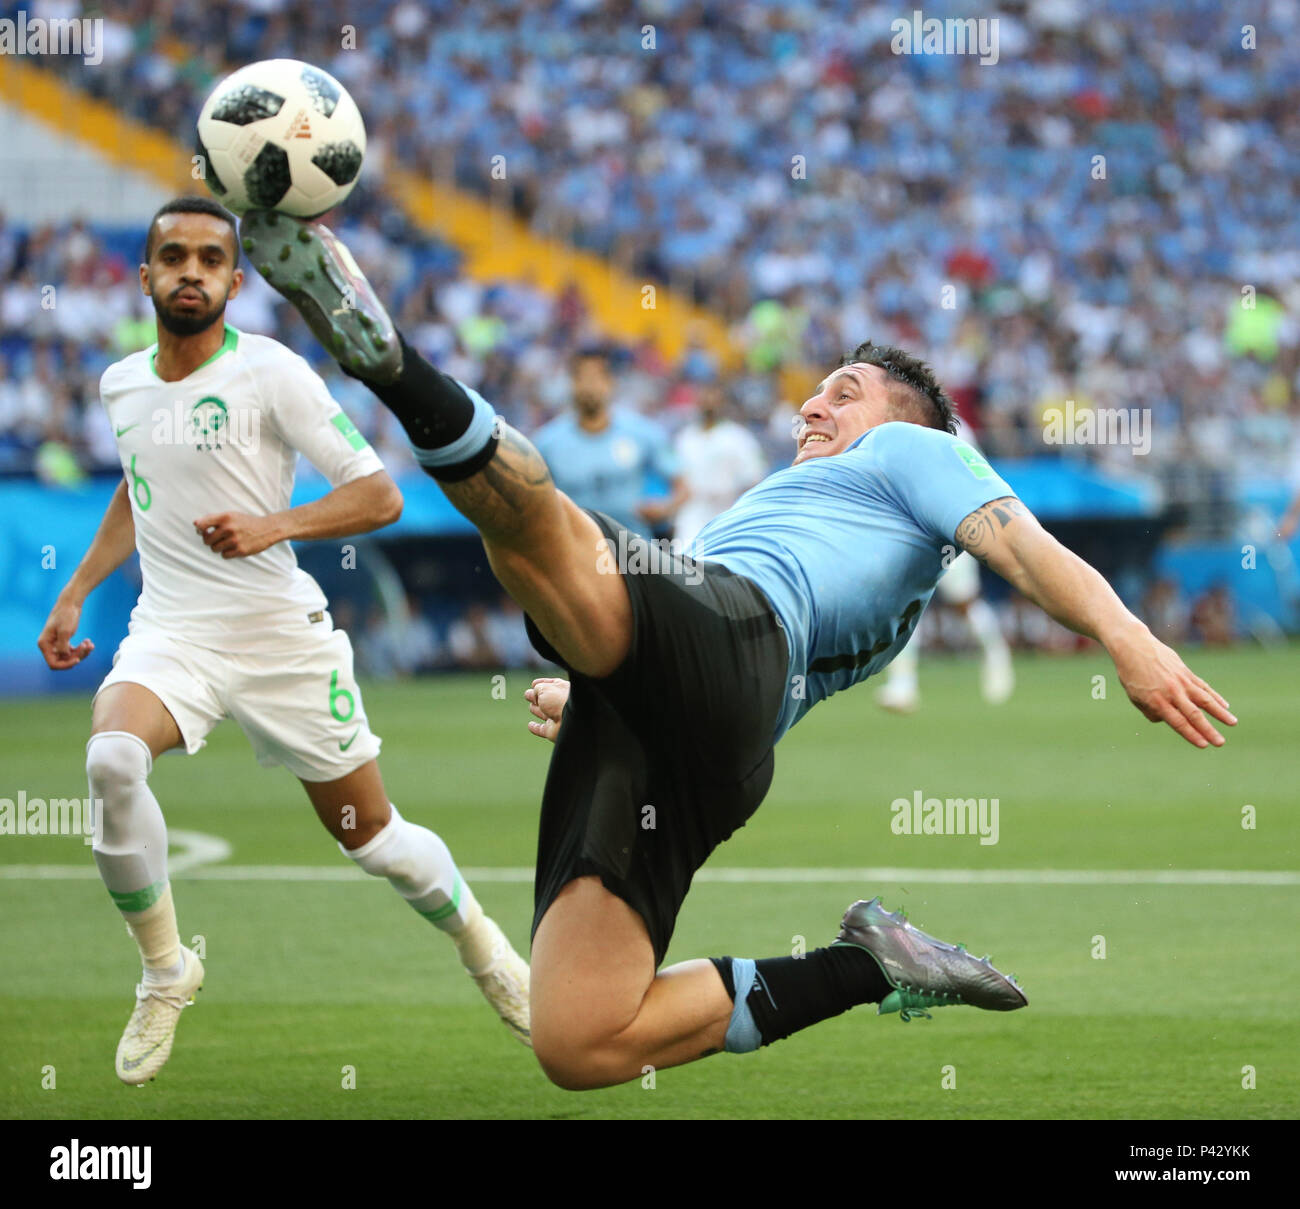 Rostov On Don. 20th June, 2018. Cristian Rodriguez (R) of Uruguay competes during a Group A match between Uruguay and Saudi Arabia at the 2018 FIFA World Cup in Rostov-on-Don, Russia, June 20, 2018. Credit: Li Ming/Xinhua/Alamy Live News Stock Photo